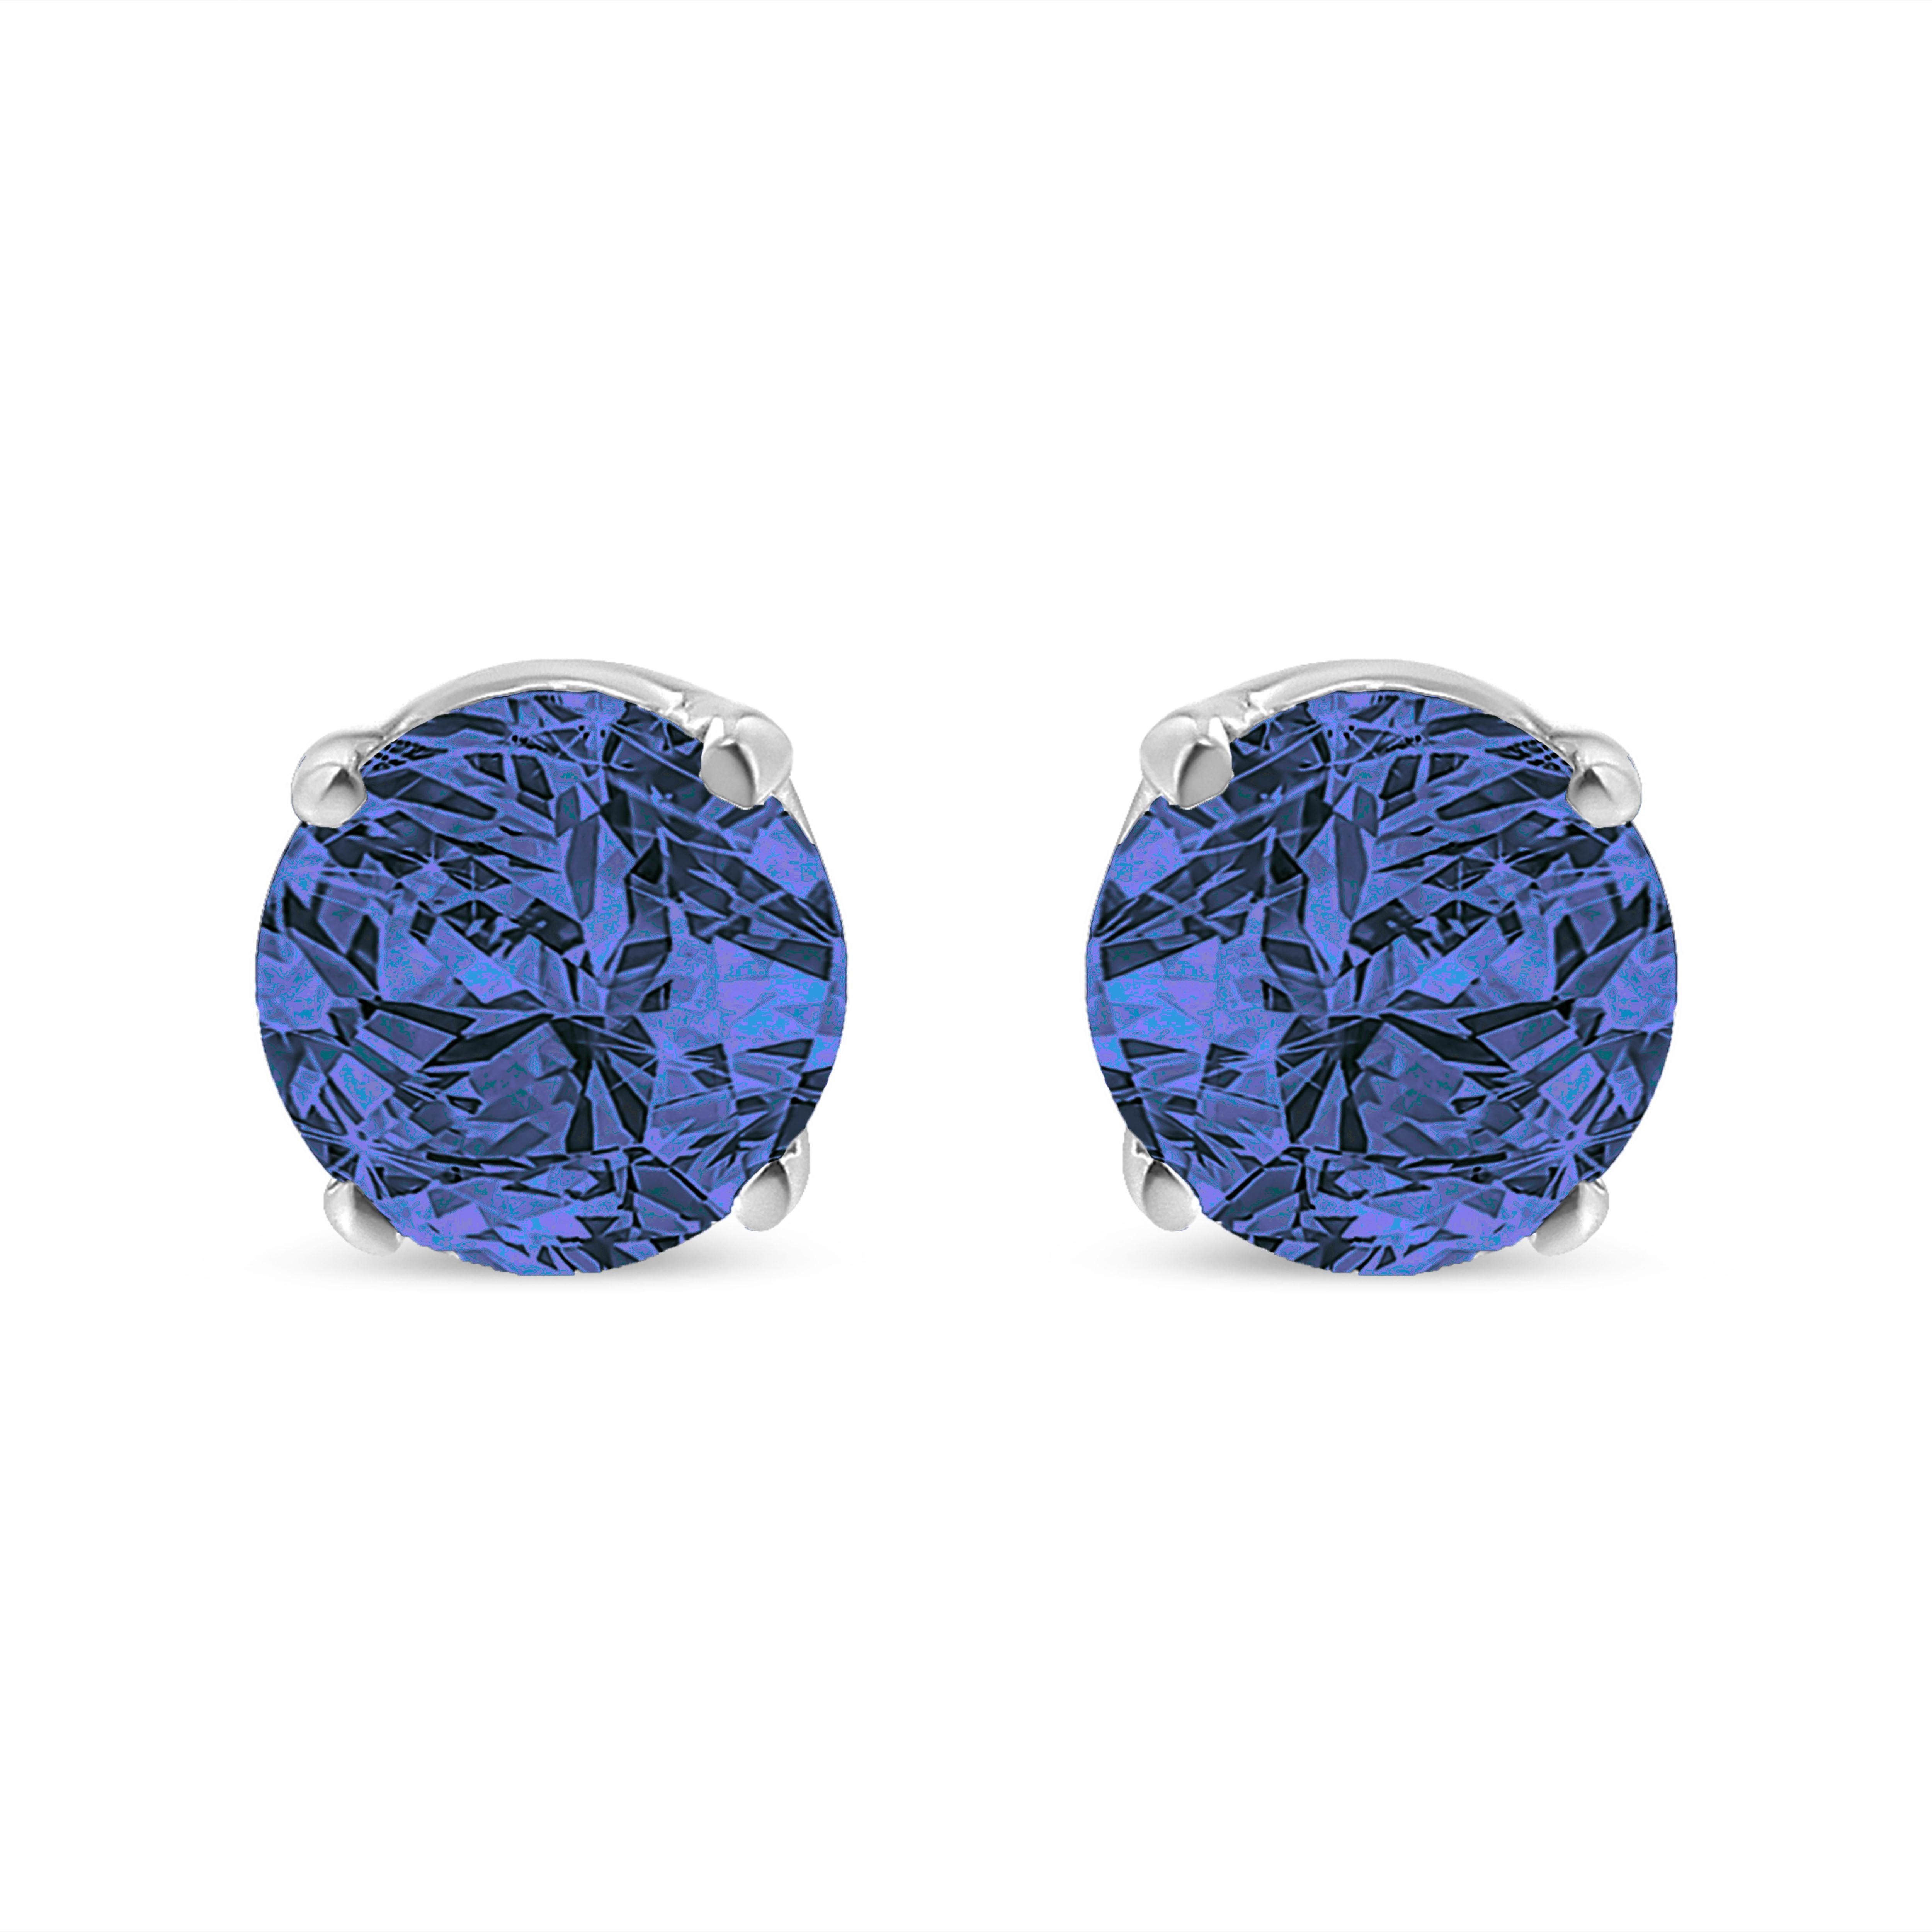 With a simple and classic design, these solitaire stud earrings feature 1/7ct TDW of diamonds. Blue, color treated, round cut diamonds in a prong setting sparkle in this design. Crafted in sterling silver, these stud earrings are perfect to wear